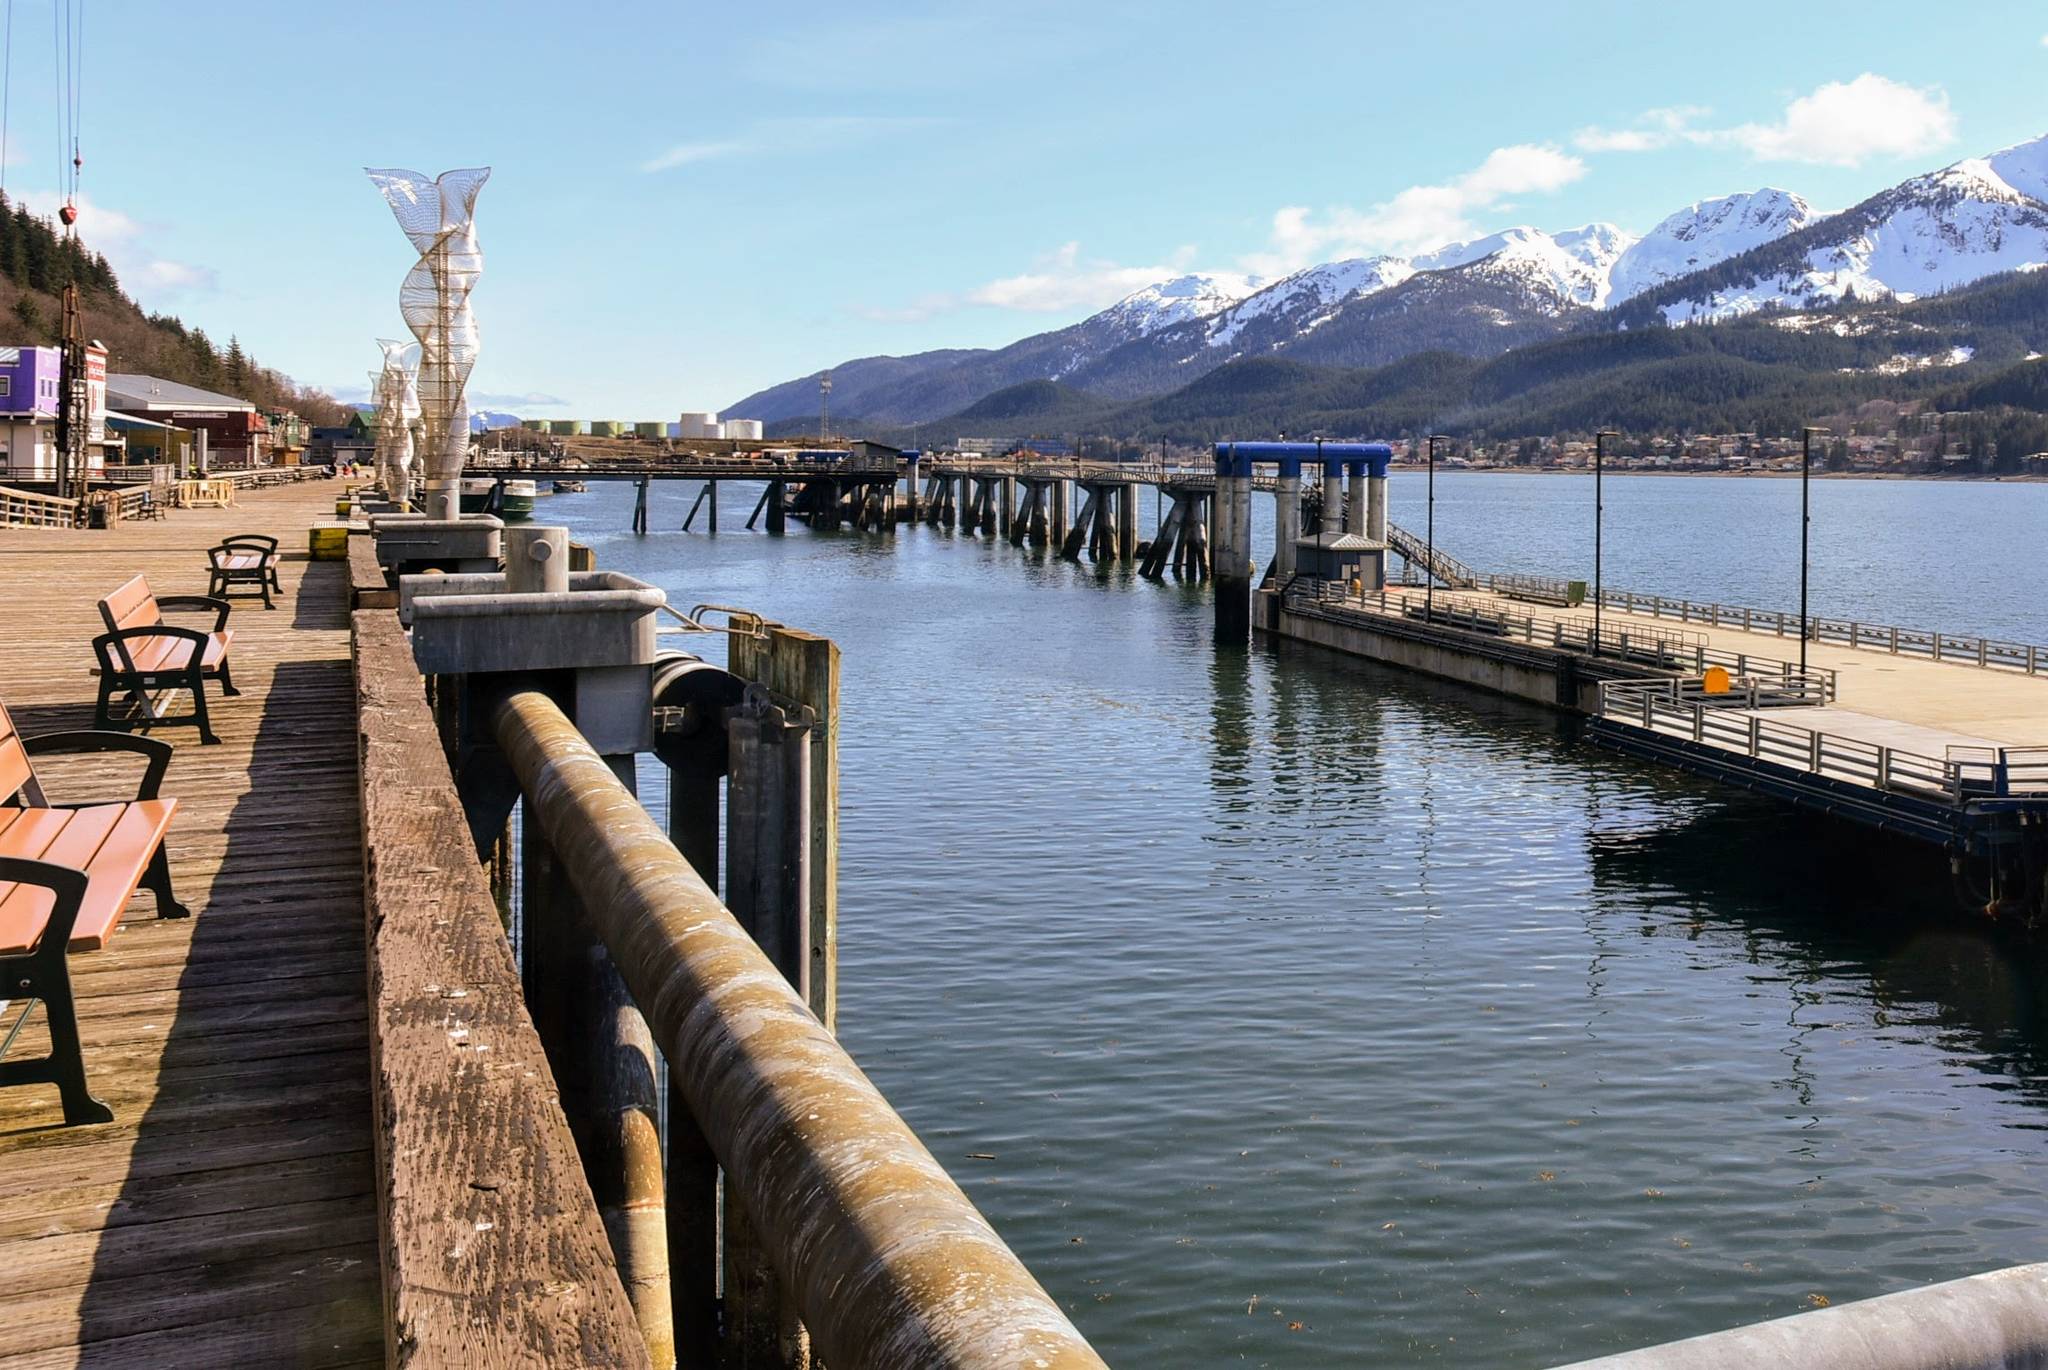 Peter Segall | Juneau Empire                                 Lack of cruise ships relying on shore power from Alaska Electric Light and Power will not affect customers, said an AEL&P official June 29, 2020.